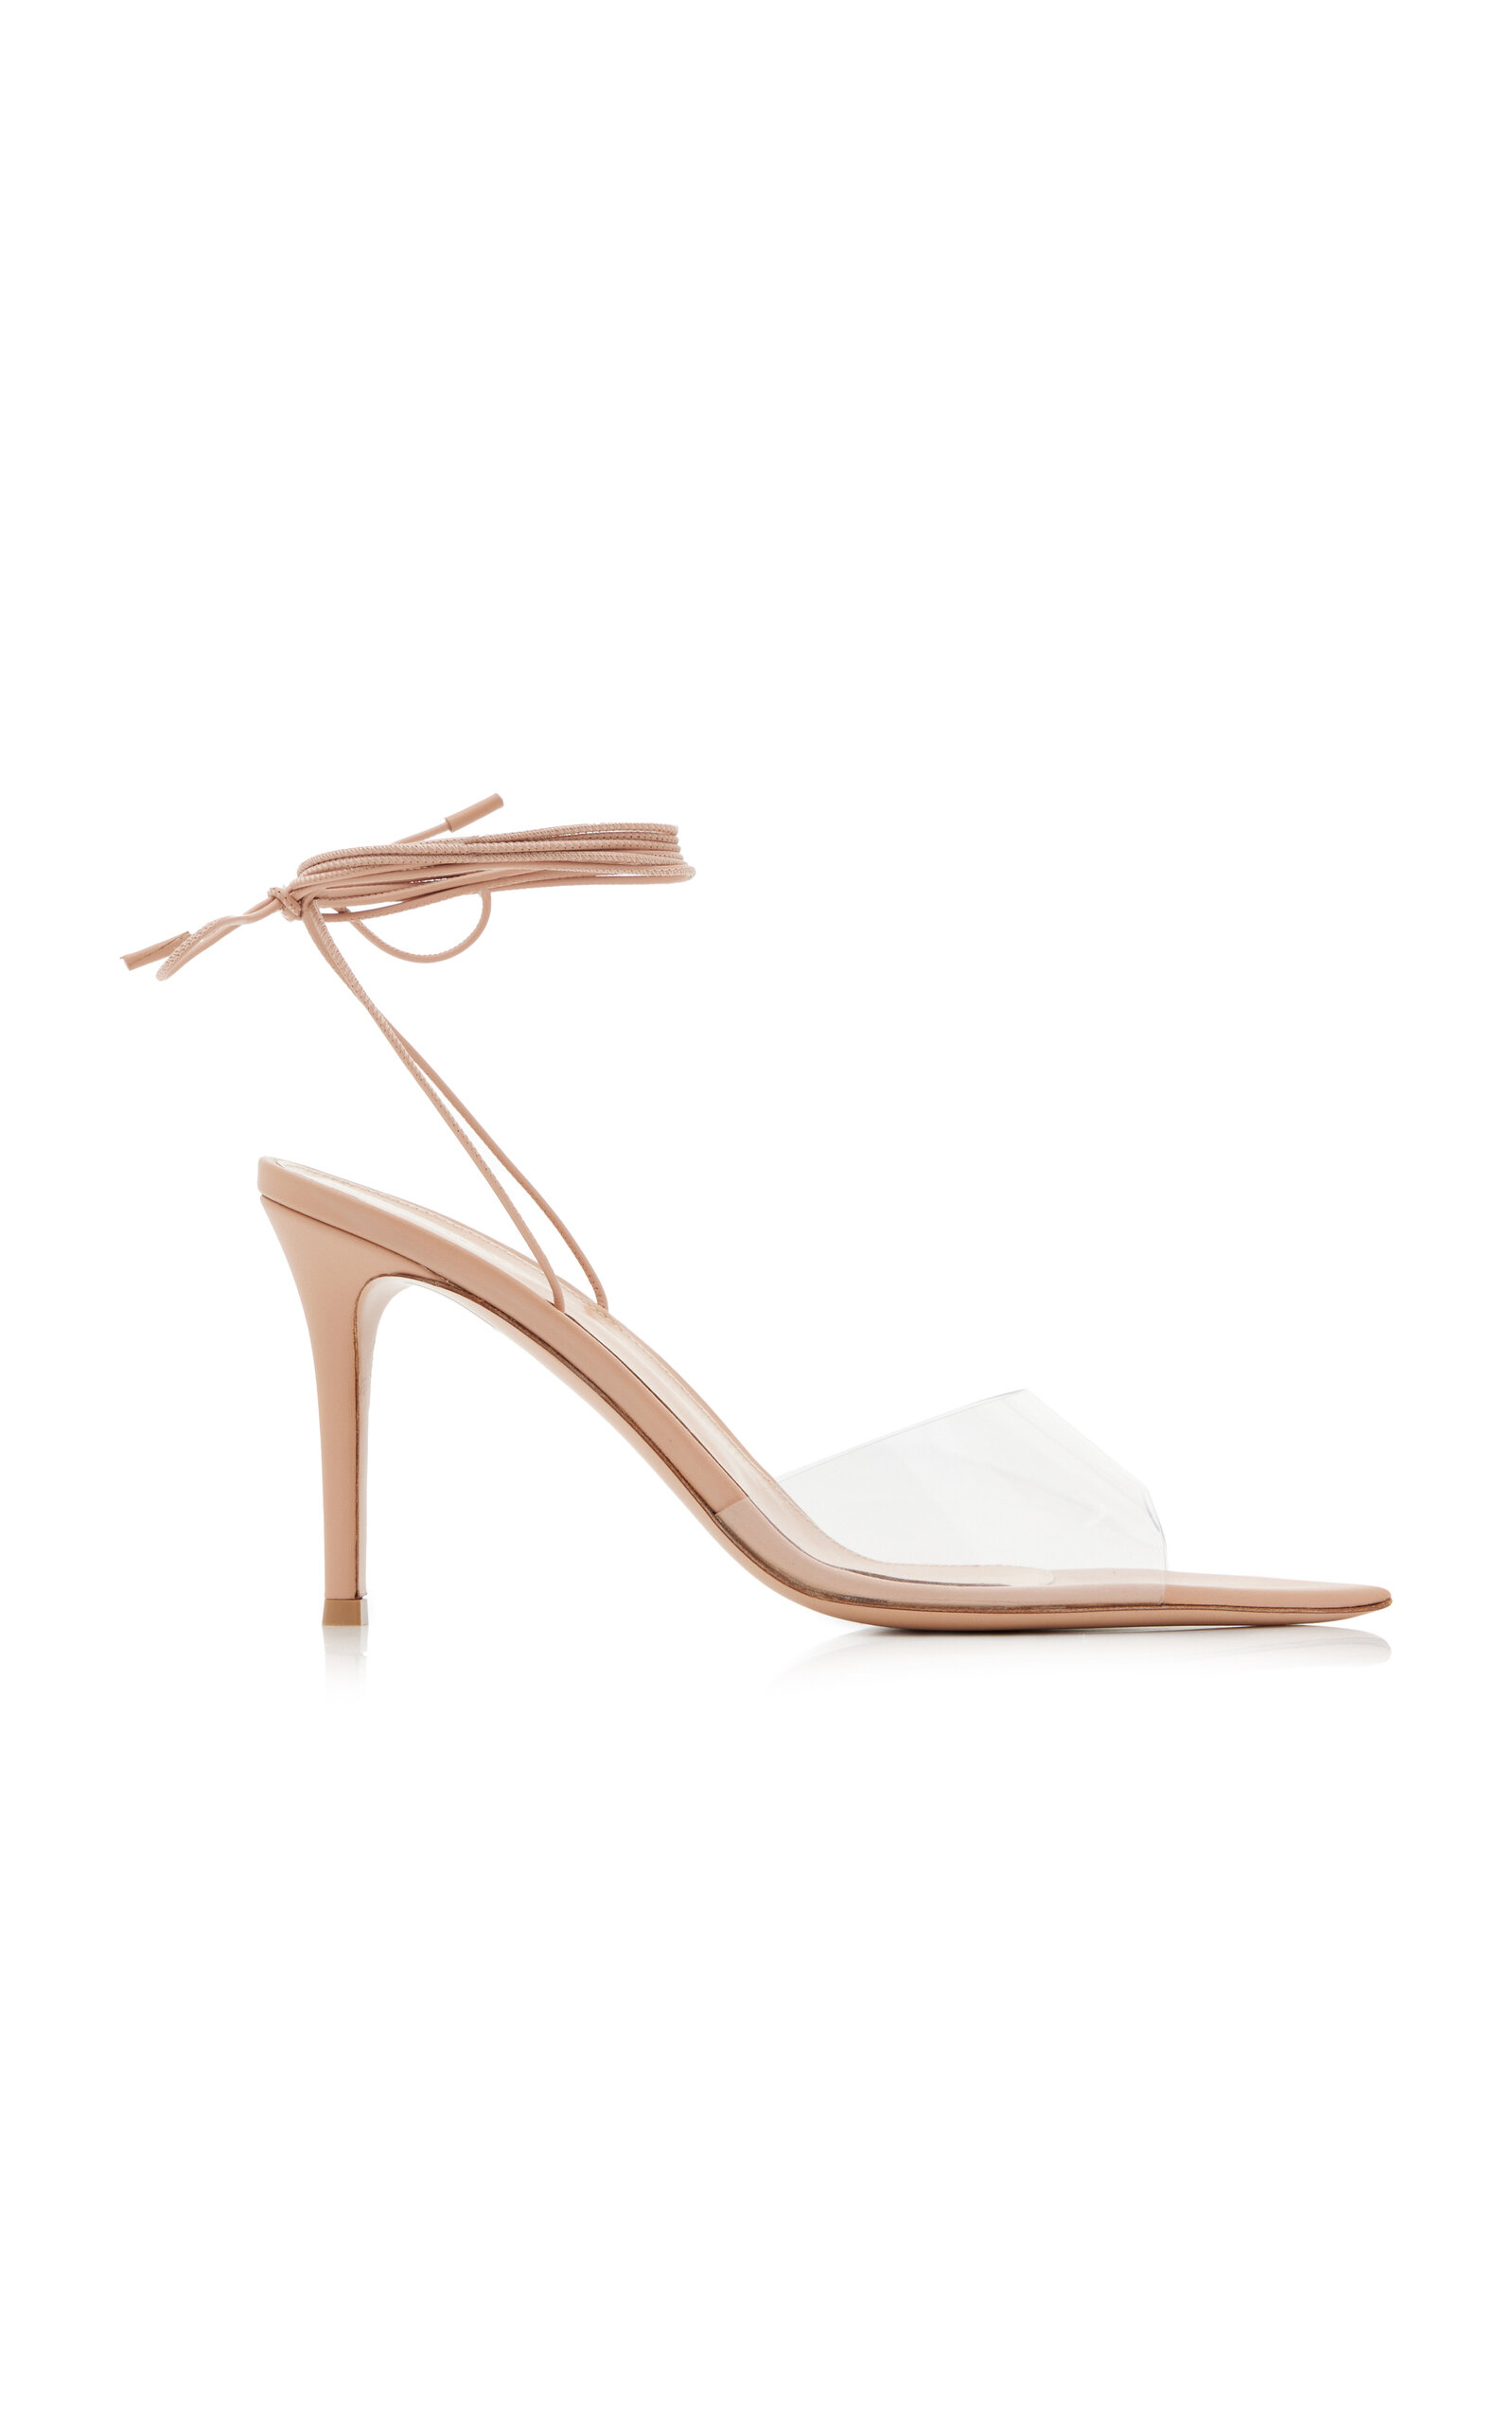 GIANVITO ROSSI SKYE LEATHER LACE-UP SANDALS